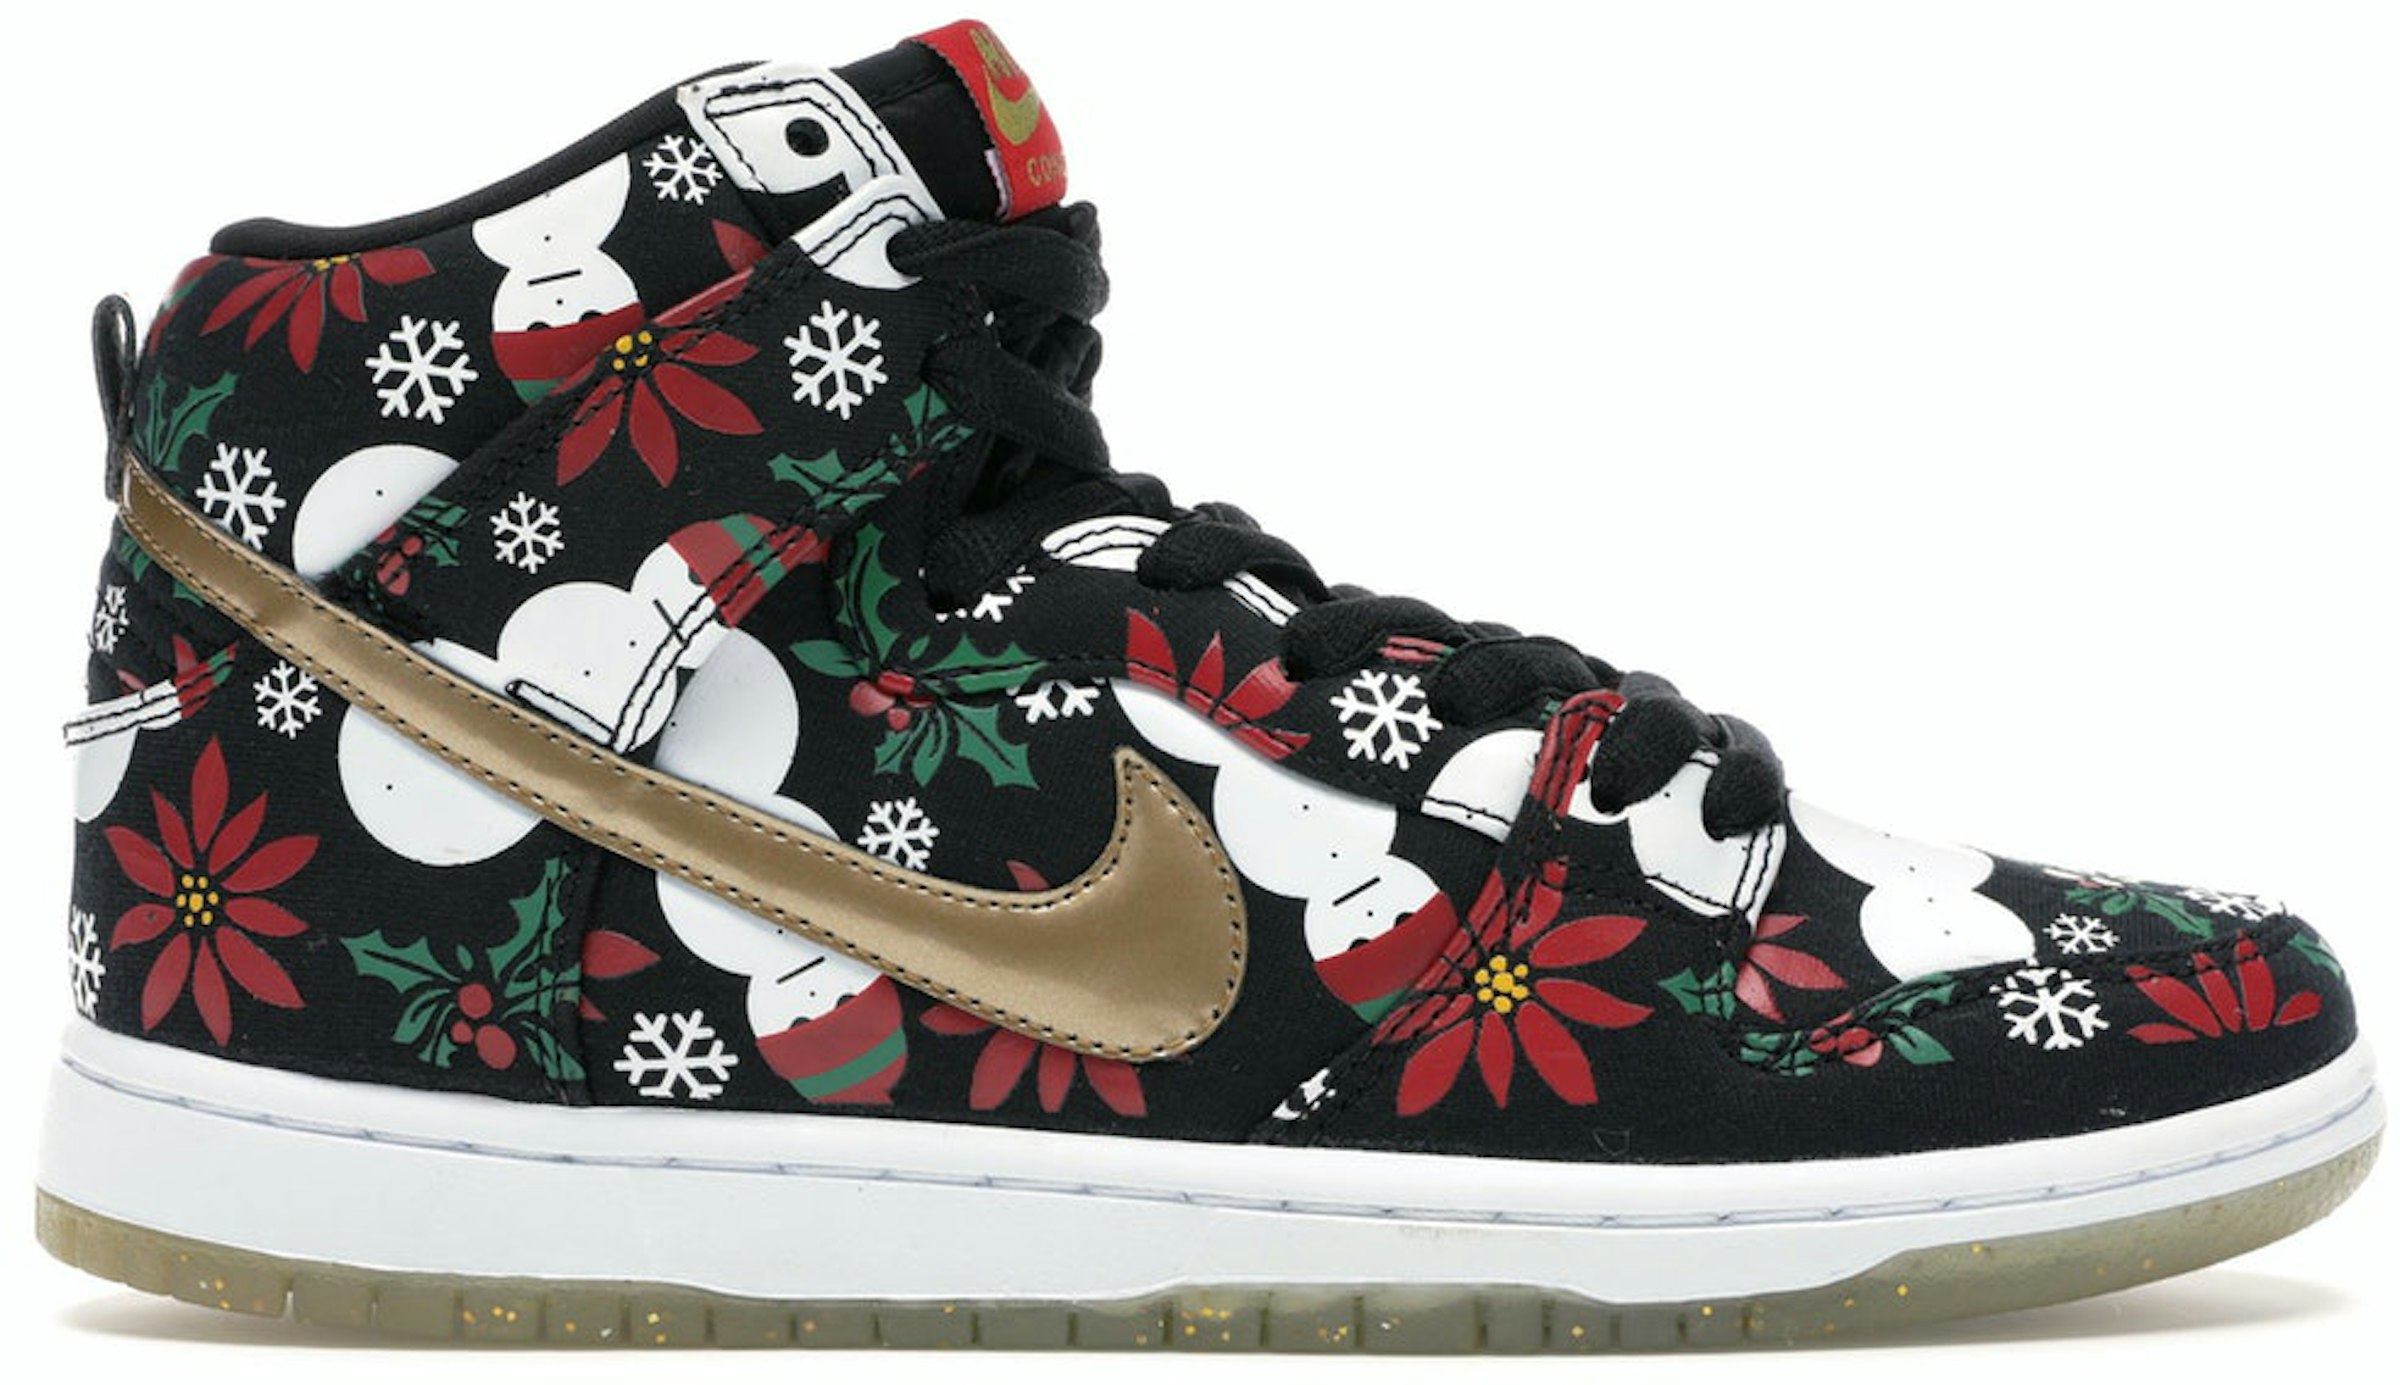 Nike SB Dunk High Ugly Christmas Sweater Black (Special Box) - 635525-006 - US